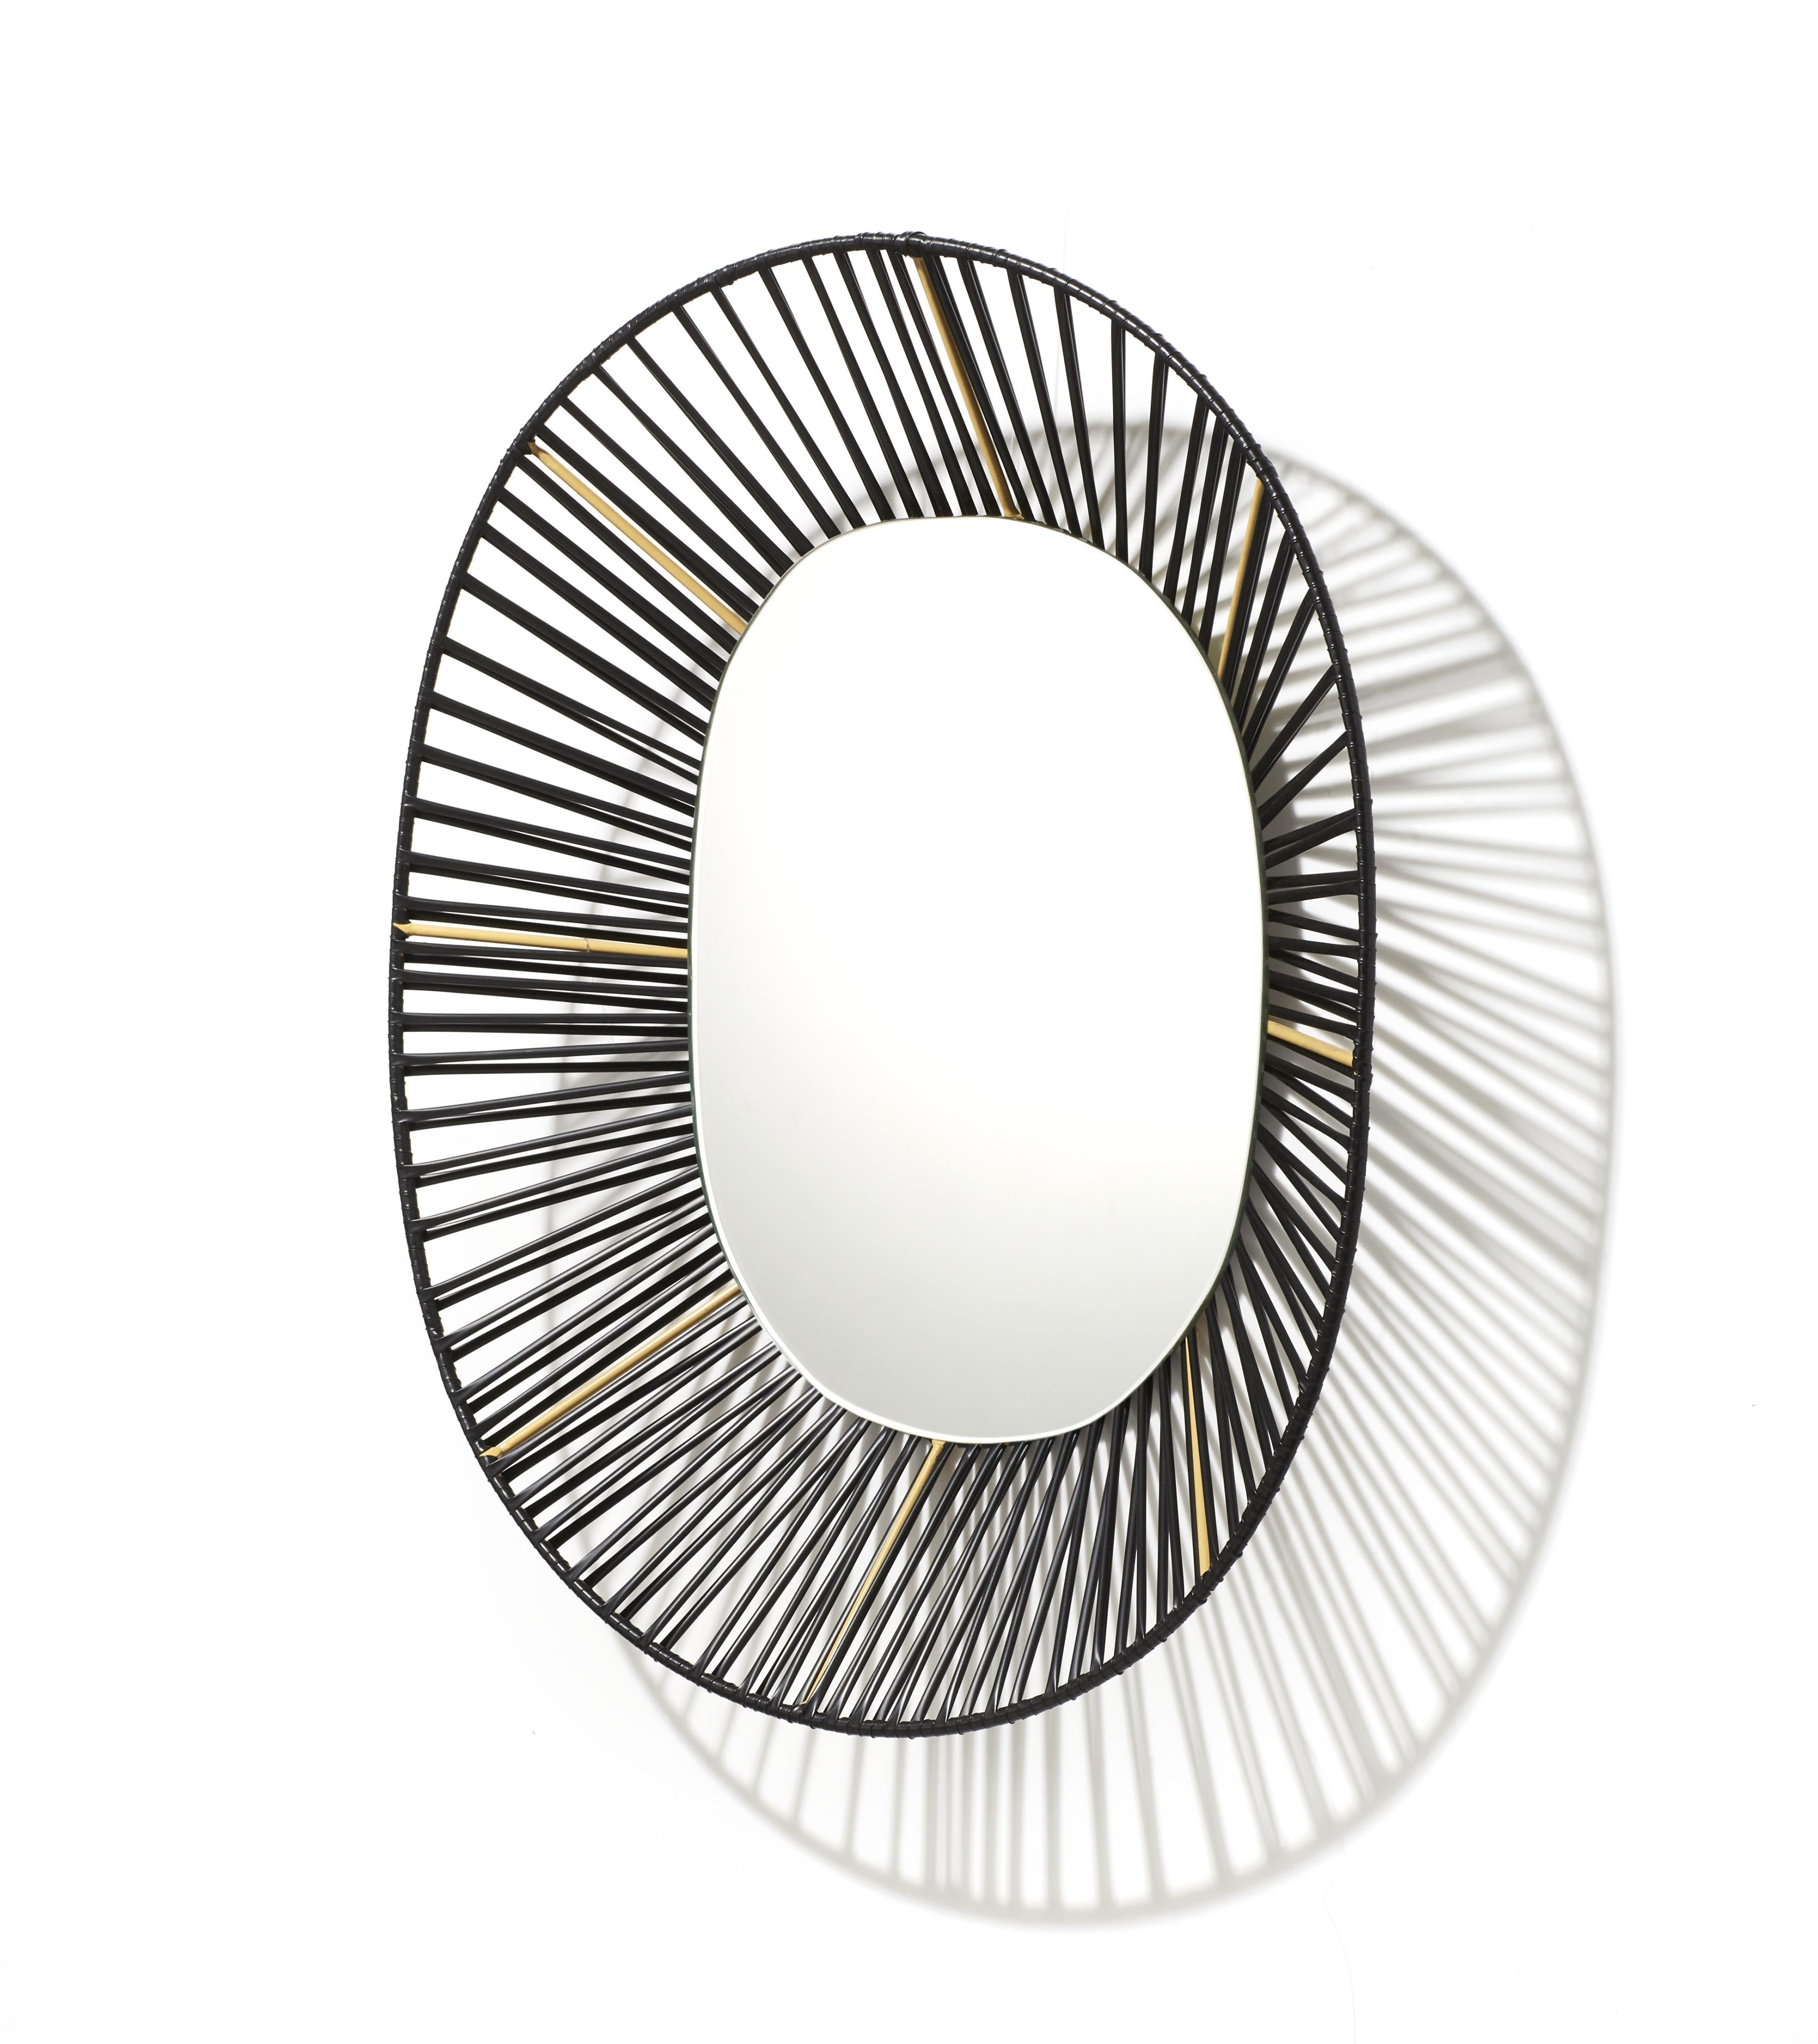 Cesta oval mirror by Pauline Deltour
Materials: Galvanized and powder-coated tubular steel frame. PVC strings.
Technique: Made from recycled plastic. Hand-woven in Colombia. 
Dimensions: W 47.5 x H 54.3 cm 
Available in colors: oliv green/ carne,